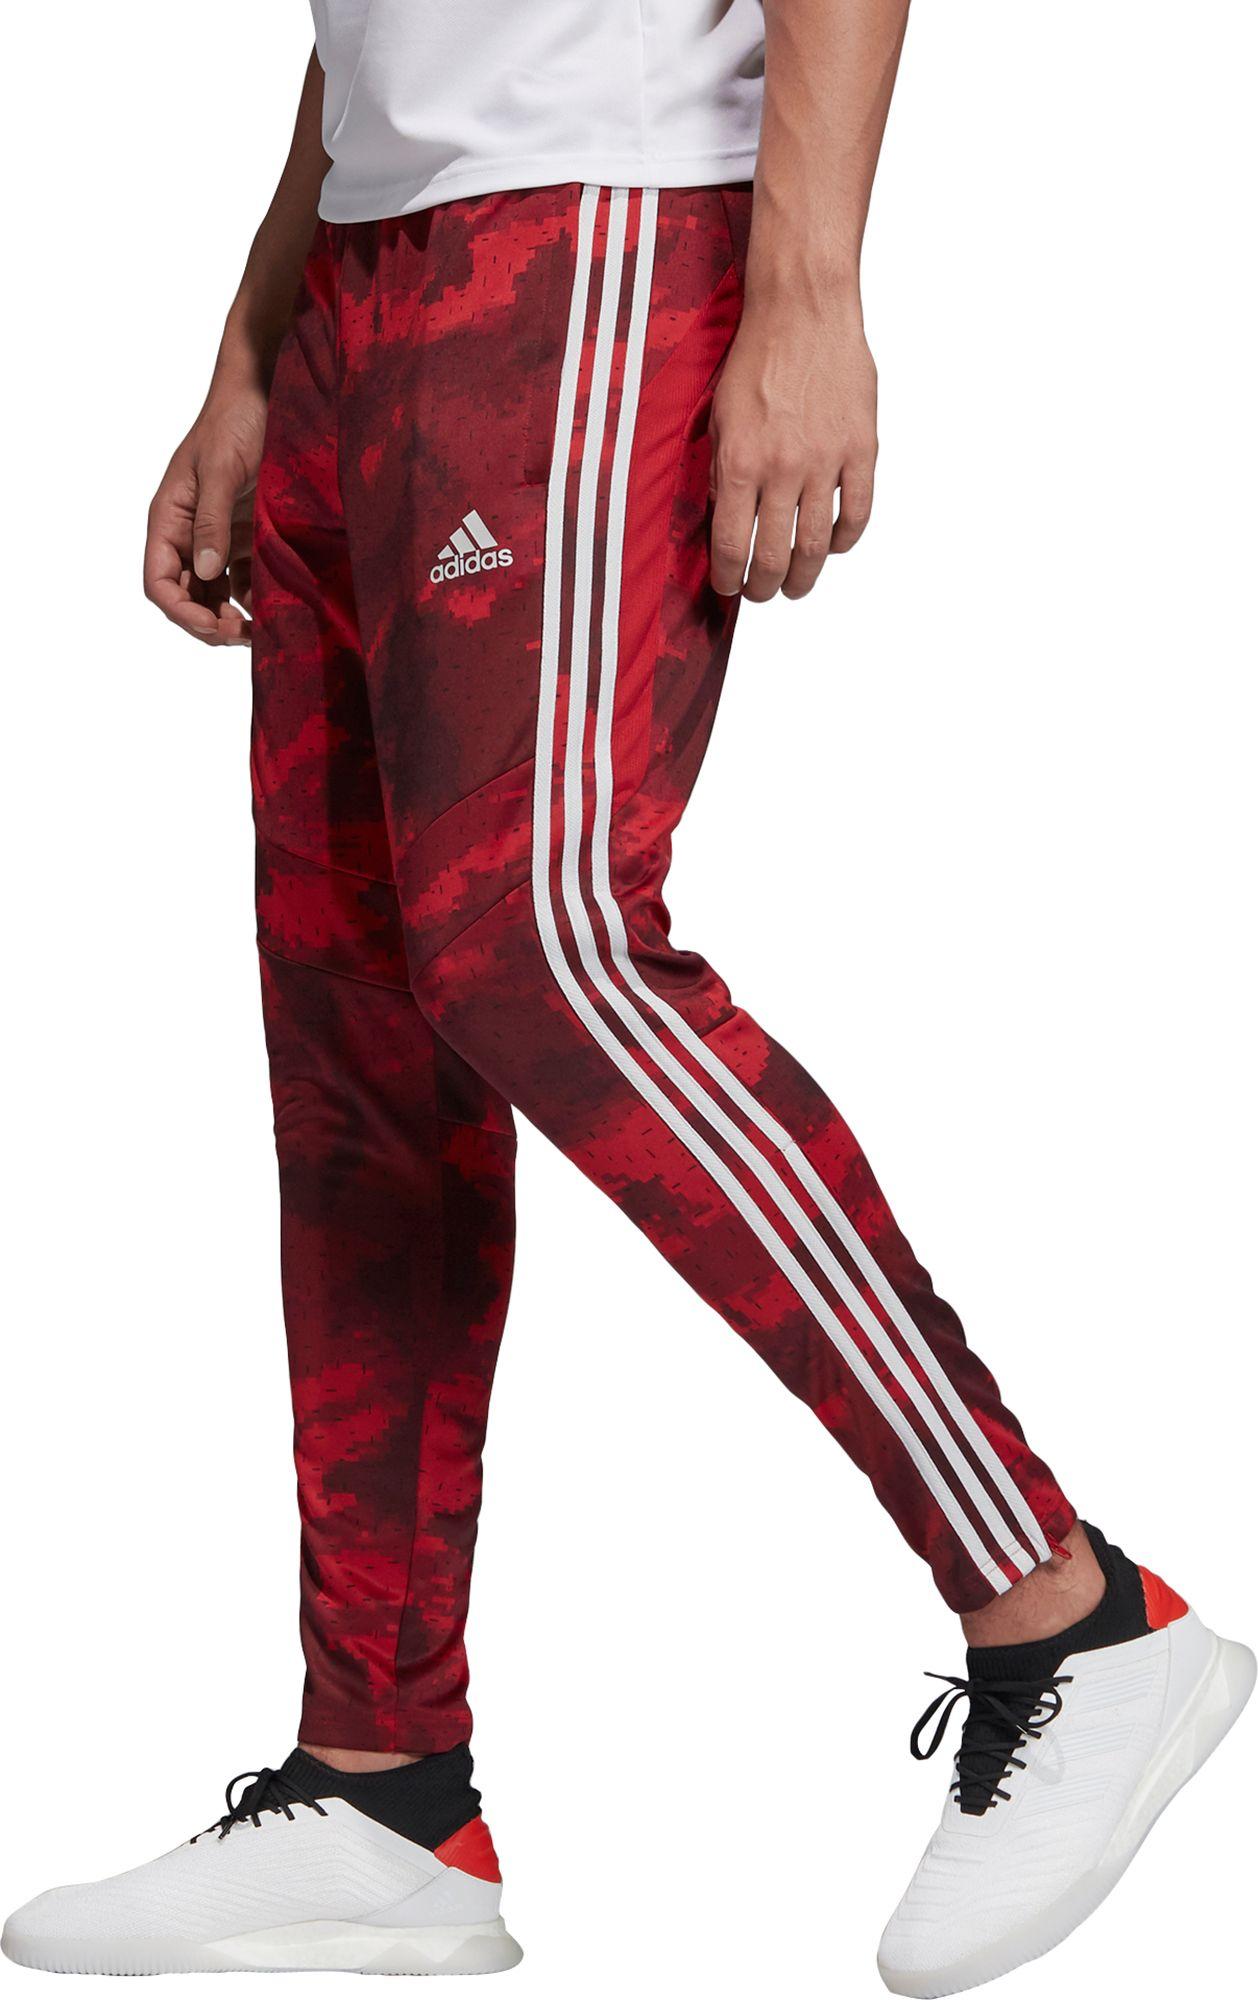 adidas Synthetic Tiro 19 Camo Training Pants in Red for Men - Lyst